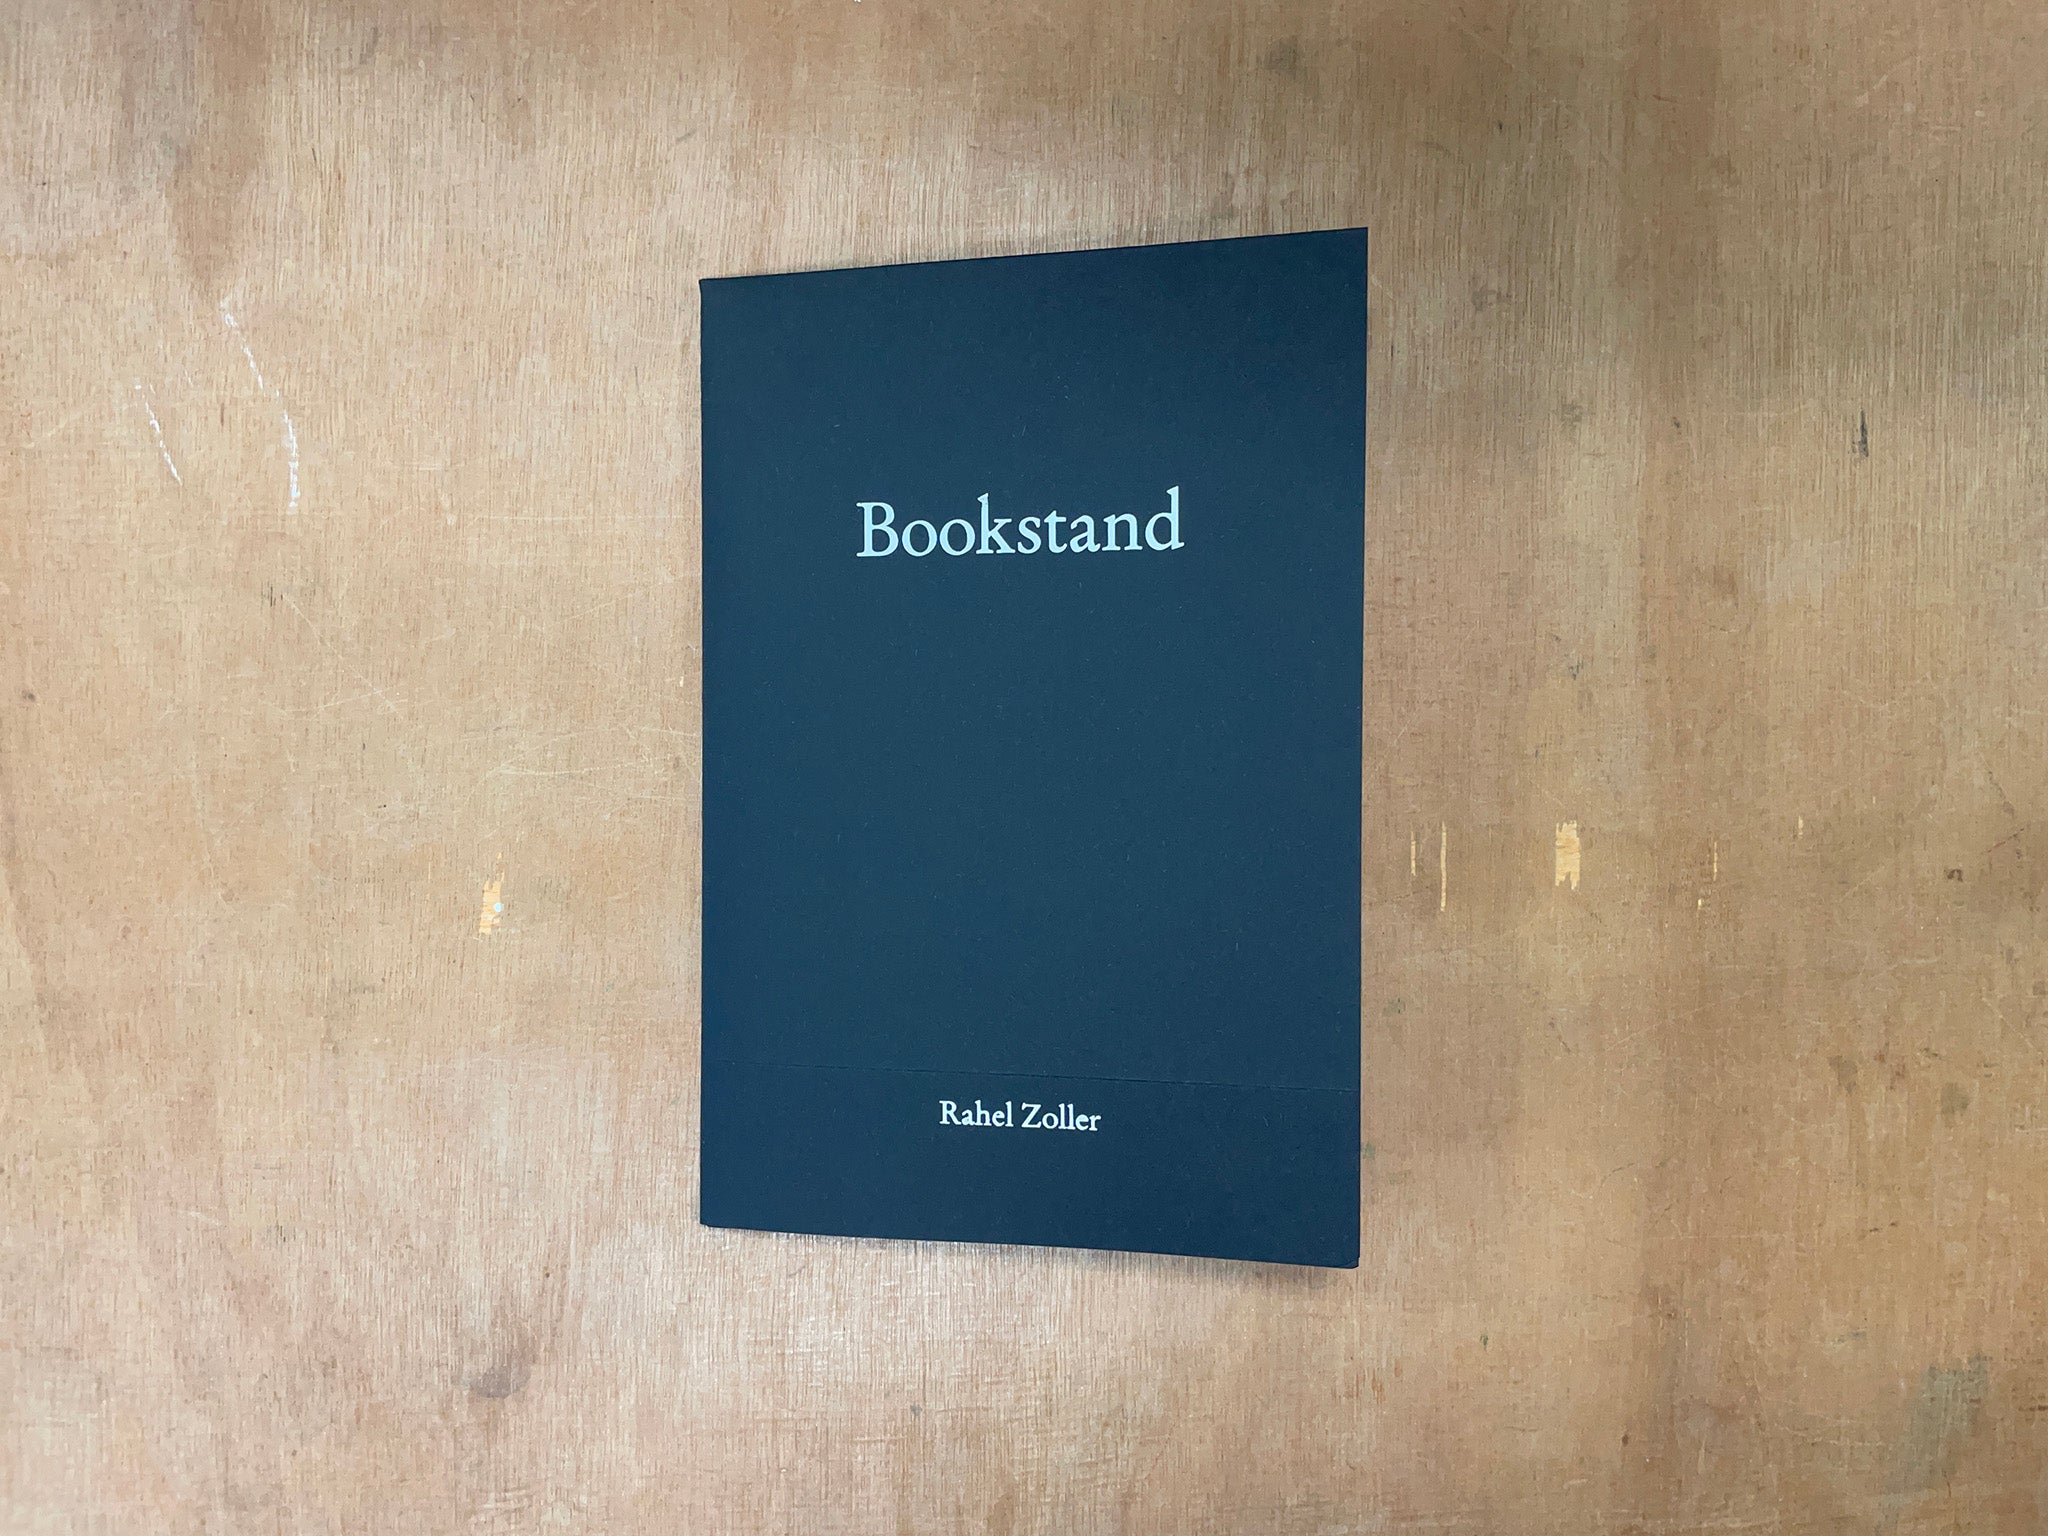 BOOKSTAND by Rahel Zoller